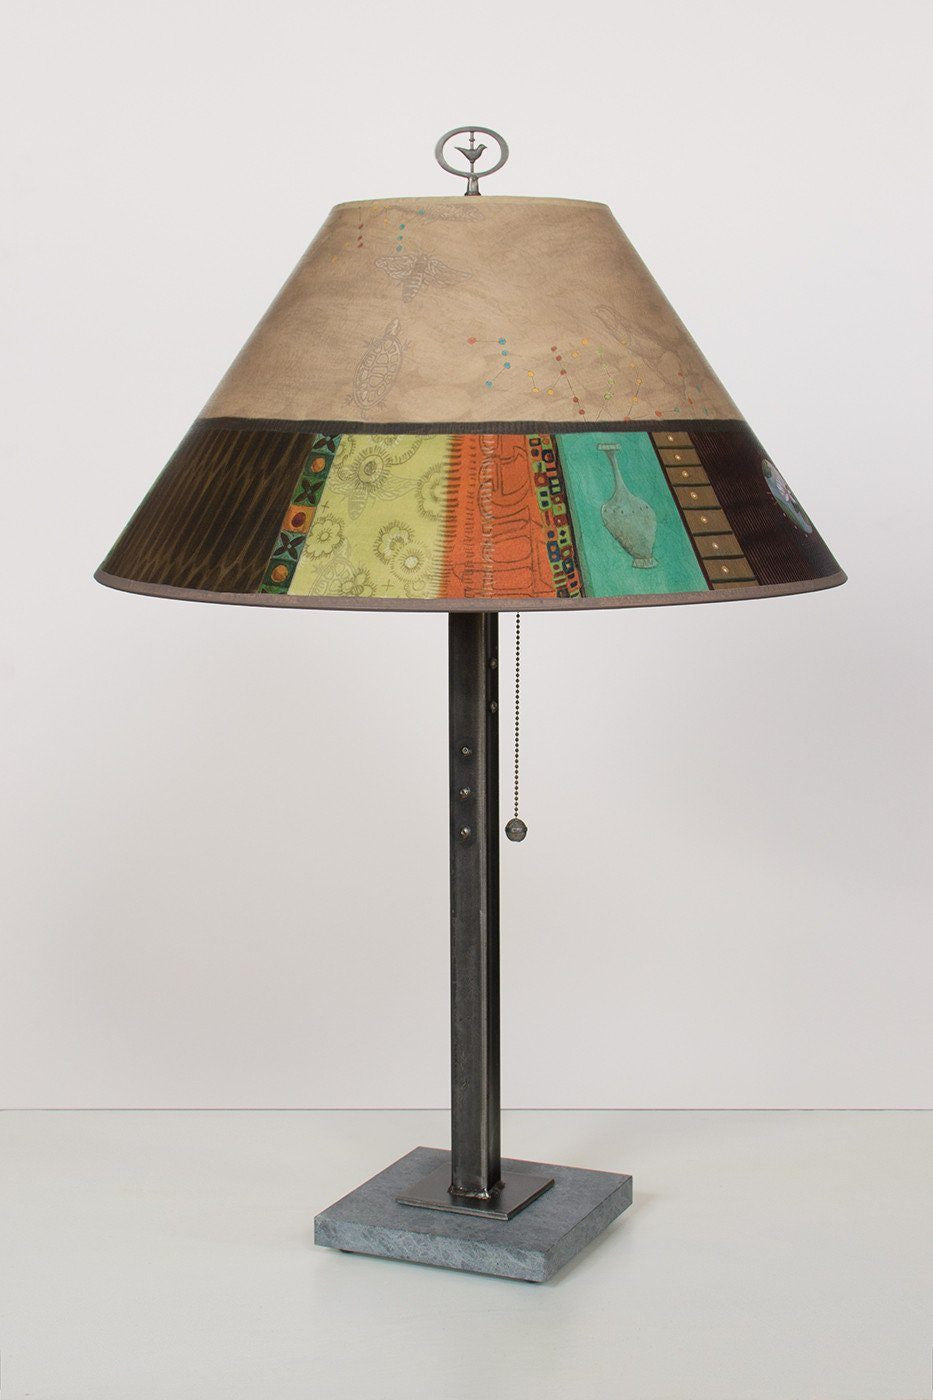 Steel Table Lamp on Italian Marble with Large Conical Shade in Linen Match